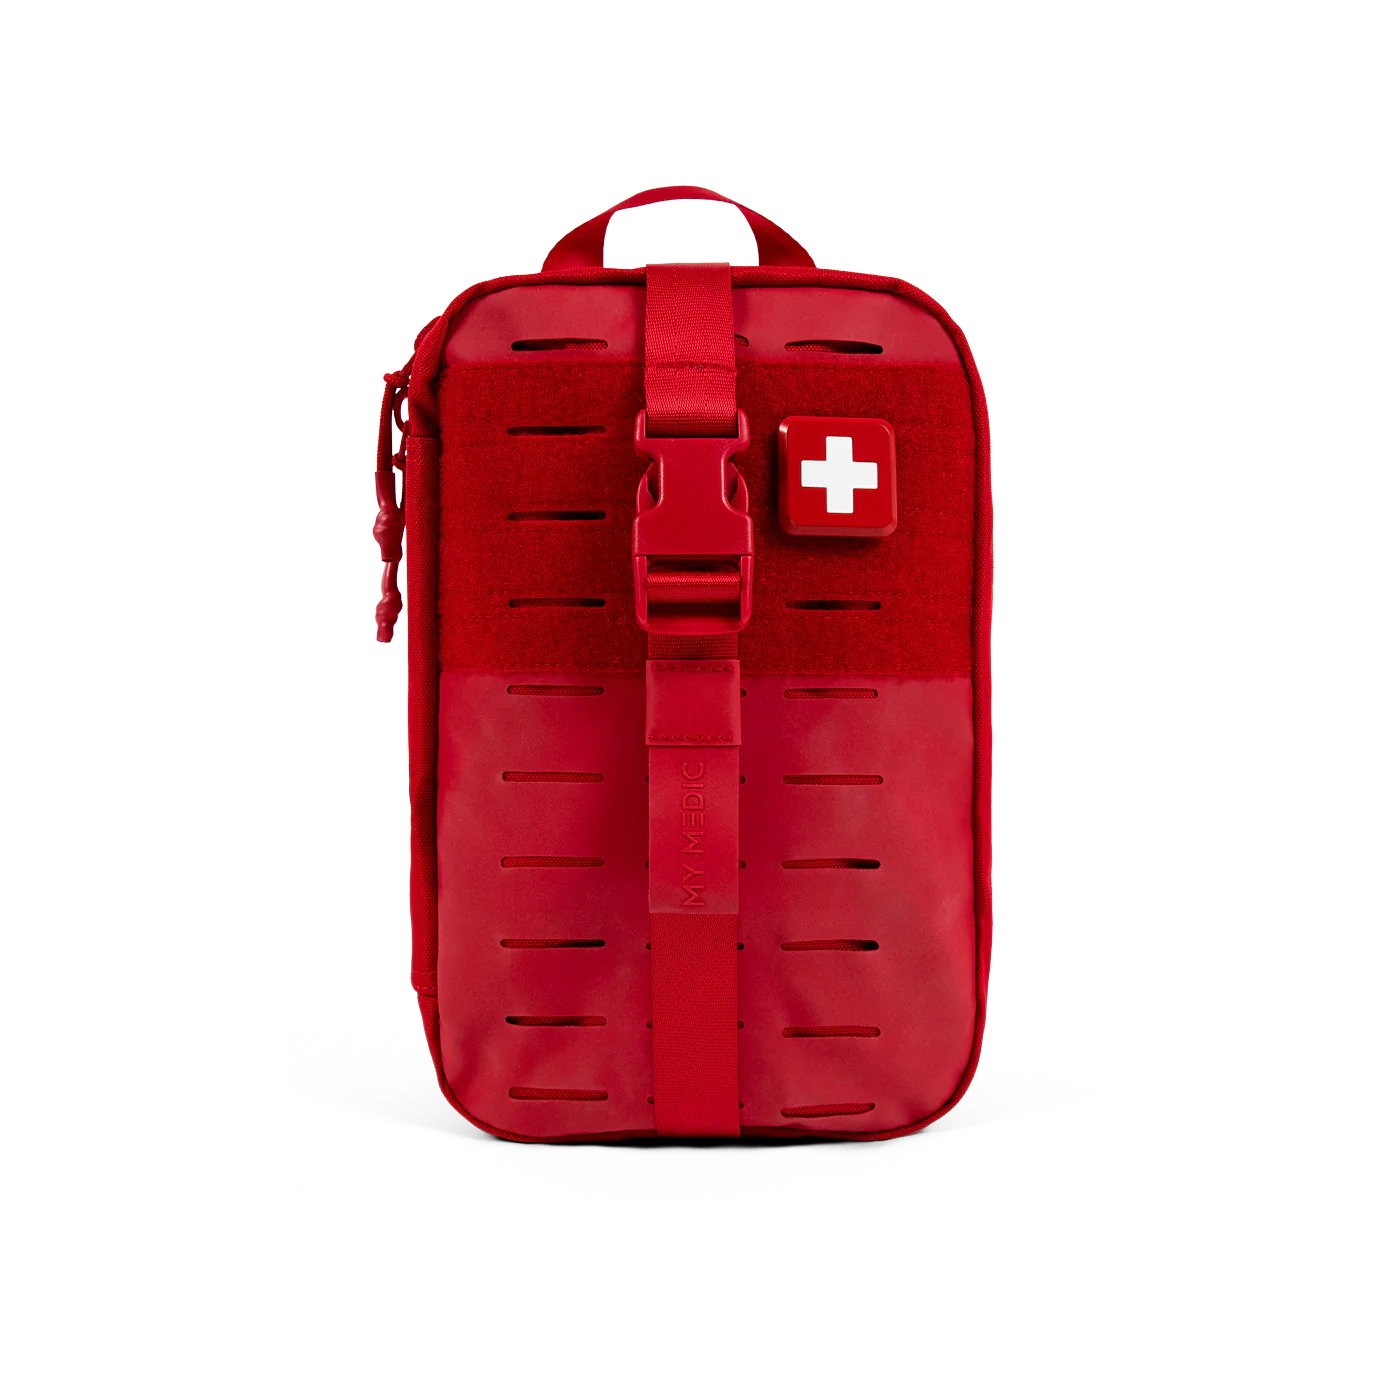 My Medic MYFAK First Aid Kit Front View